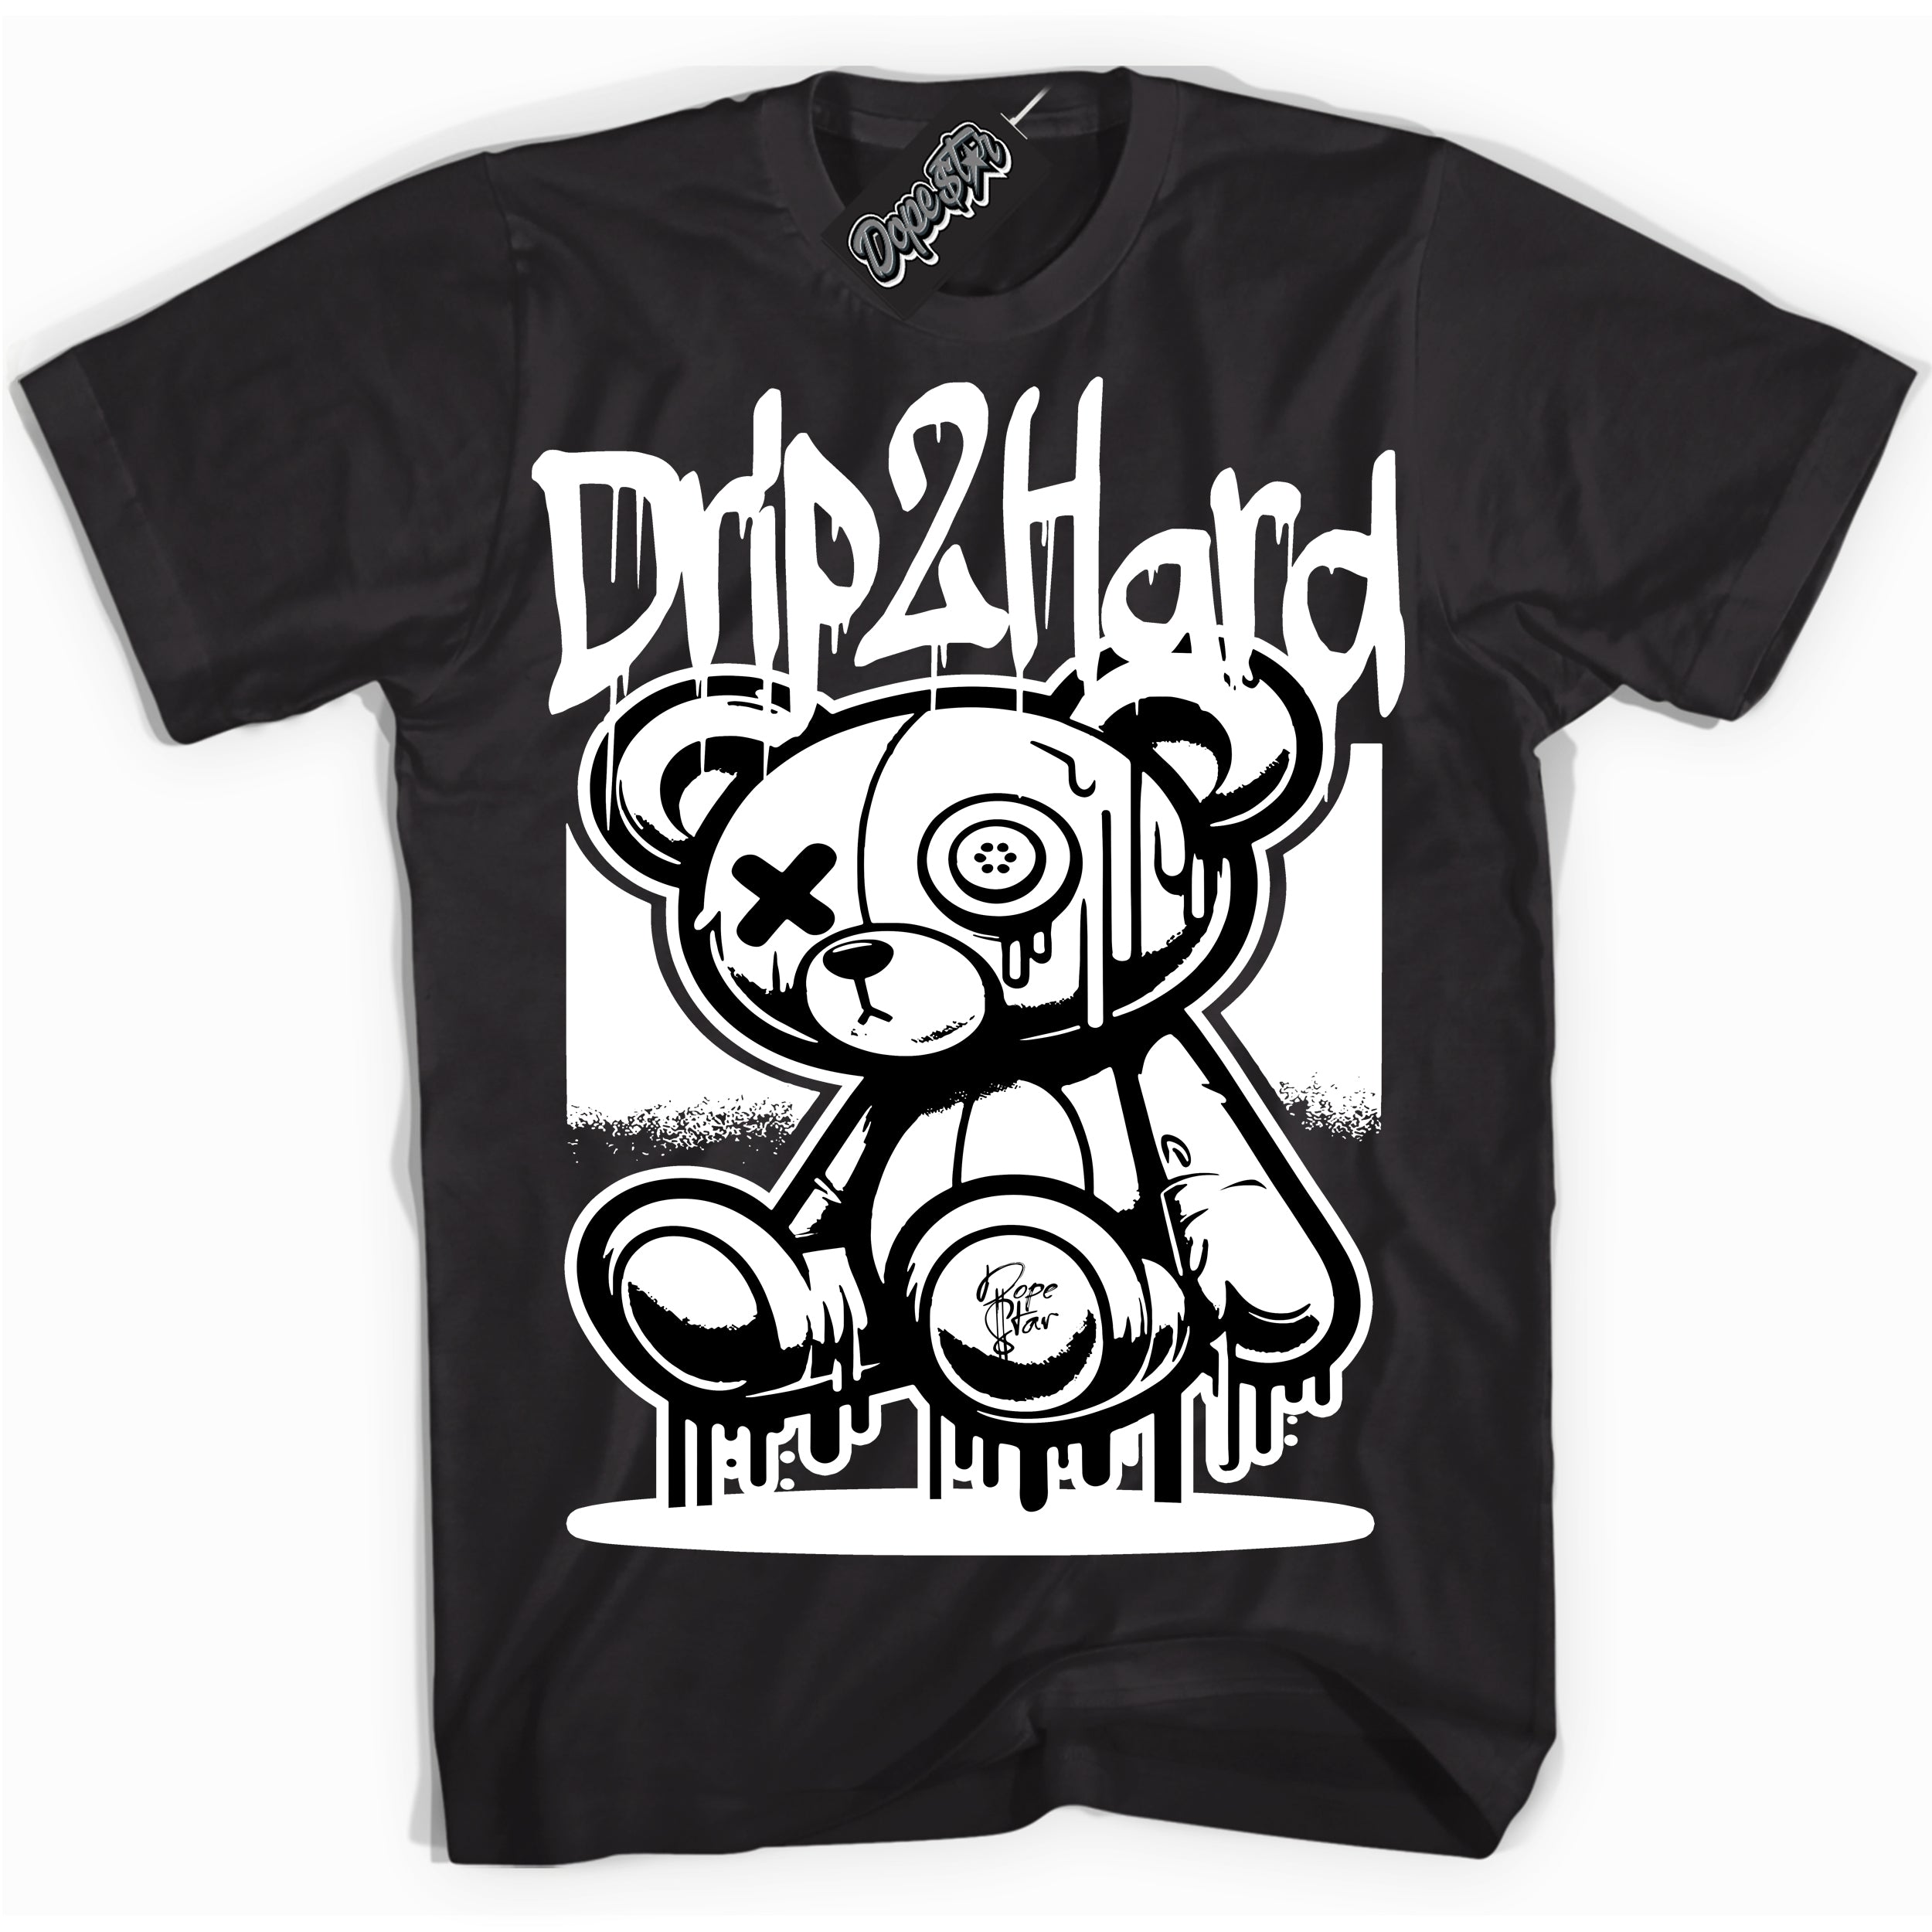 Cool Black graphic tee with “ Drip 2 Hard ” design, that perfectly matches Black White 14s